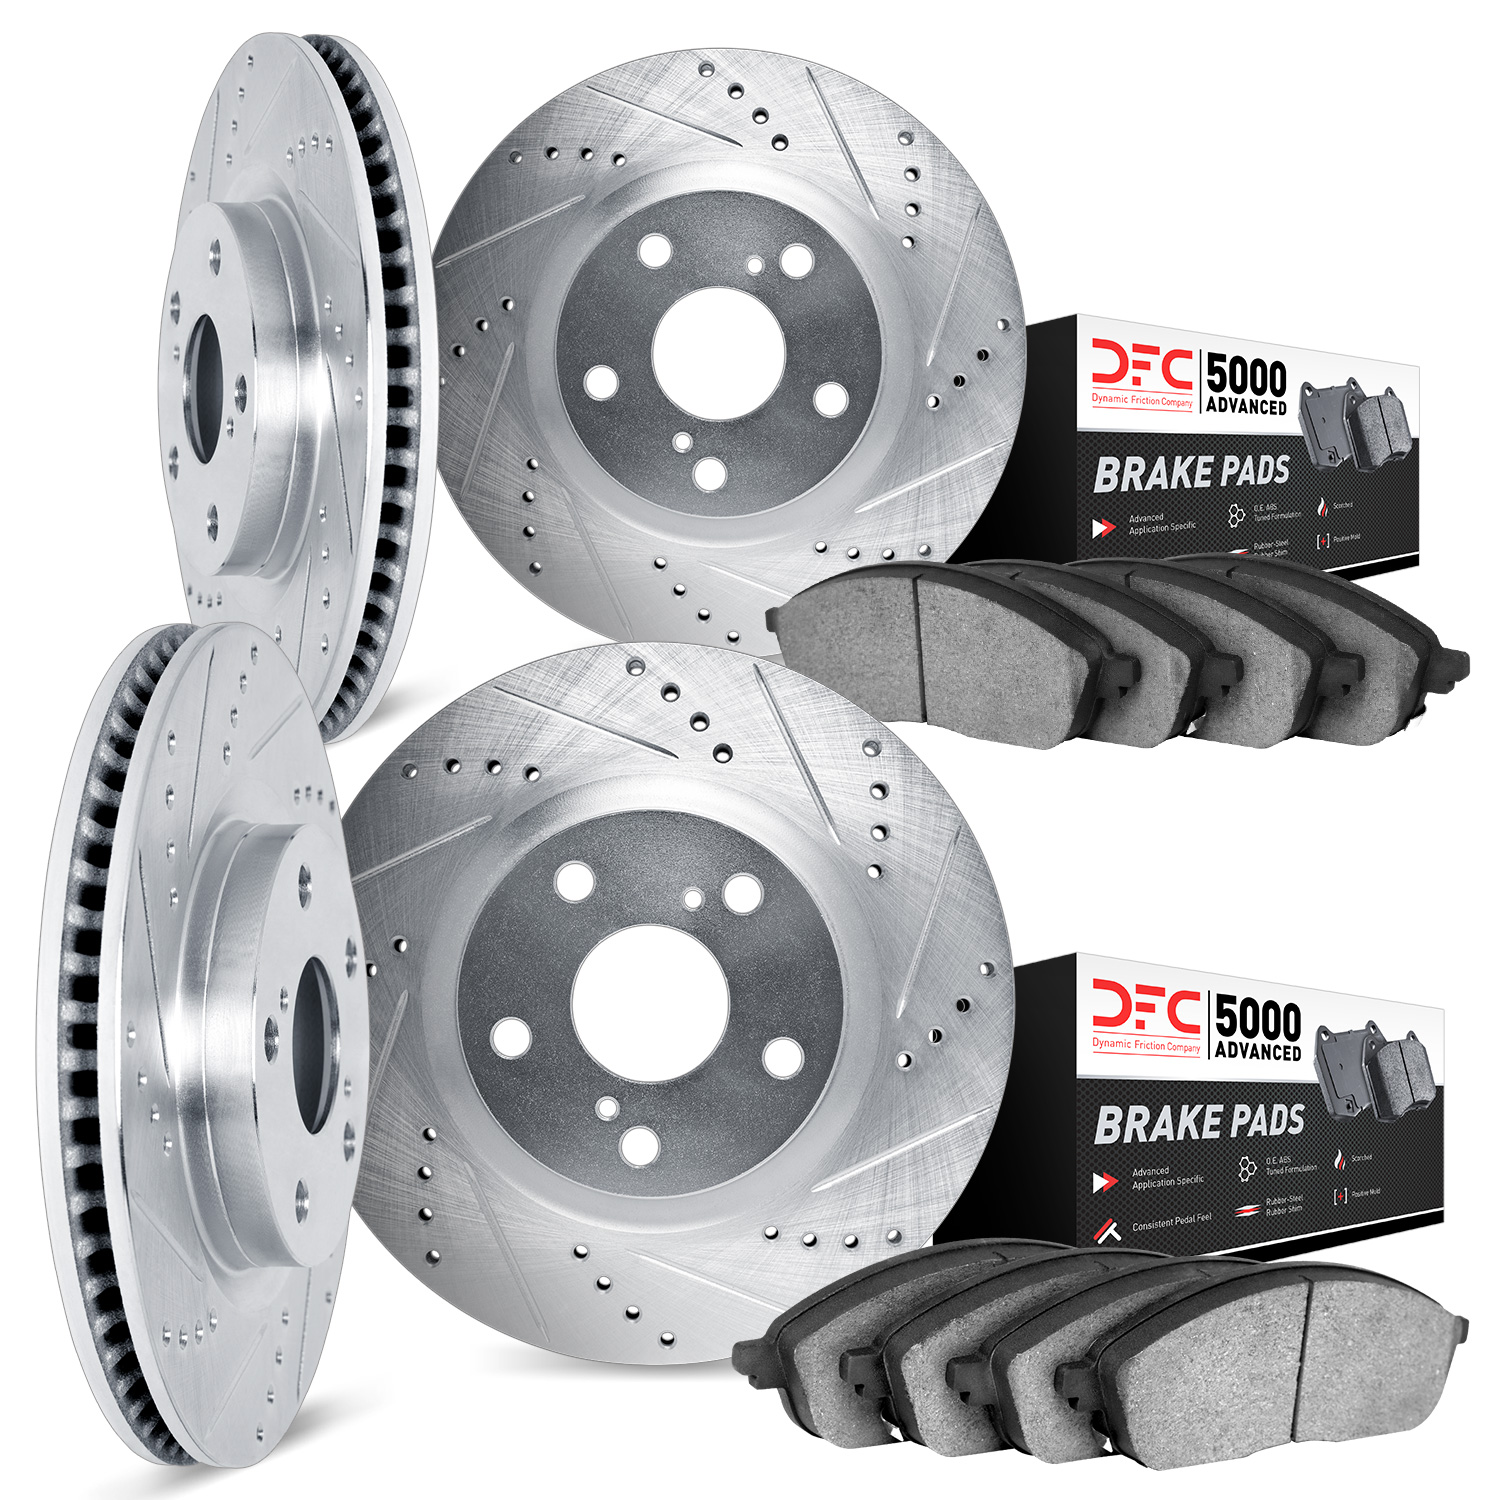 7504-75025 Drilled/Slotted Brake Rotors w/5000 Advanced Brake Pads Kit [Silver], 2018-2021 Lexus/Toyota/Scion, Position: Front a